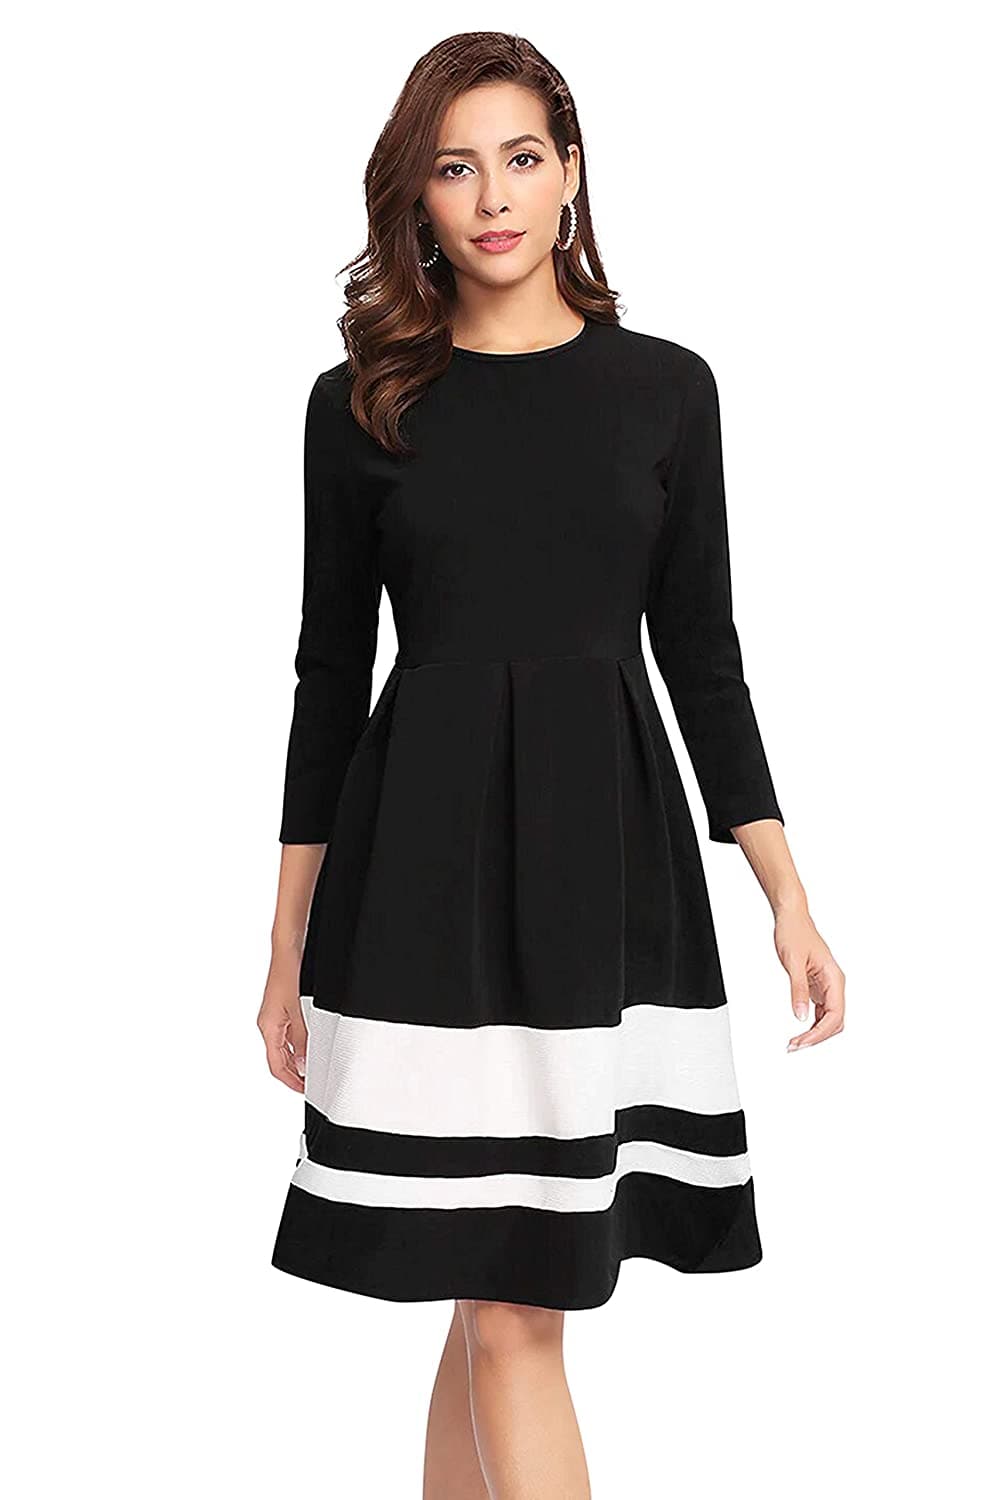 eloria Floral Printed Knee Length Dress With Three-Quarter Sleeves In Round  Neck Design - Walmart.com